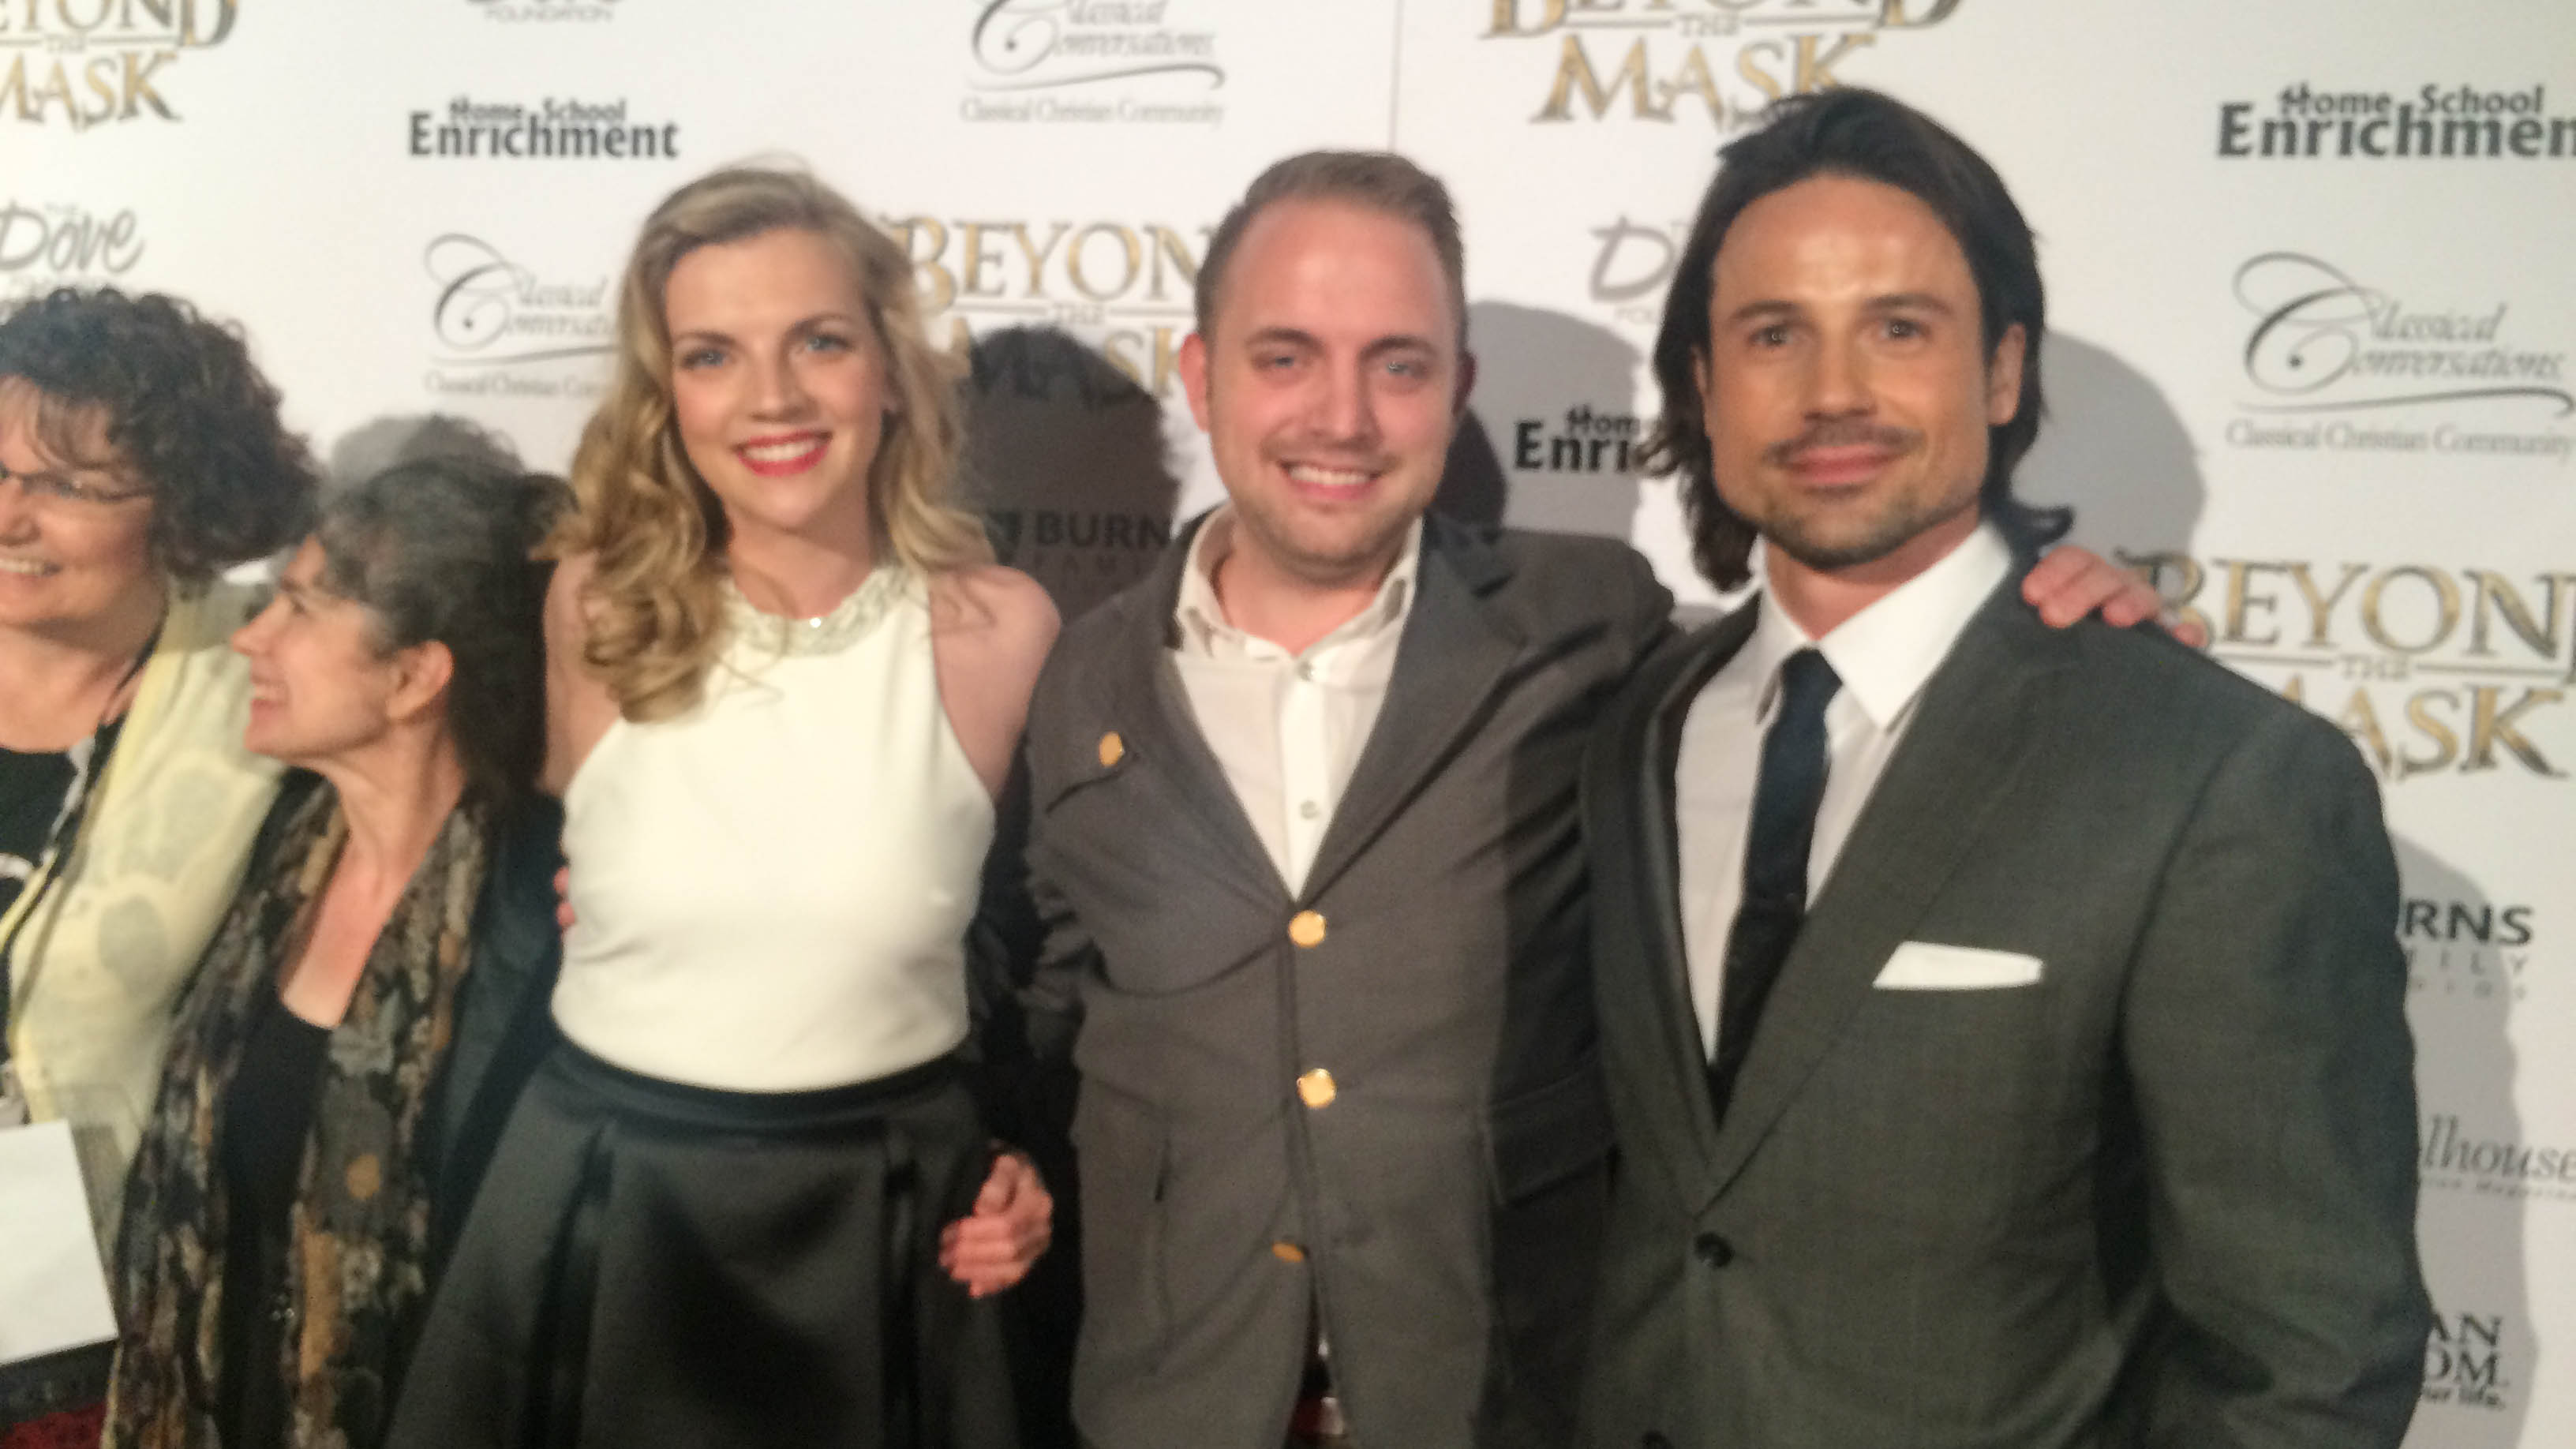 Justin Barber, Kara Killmer and Andrew Cheney at the World Premiere of Beyond The Mask.